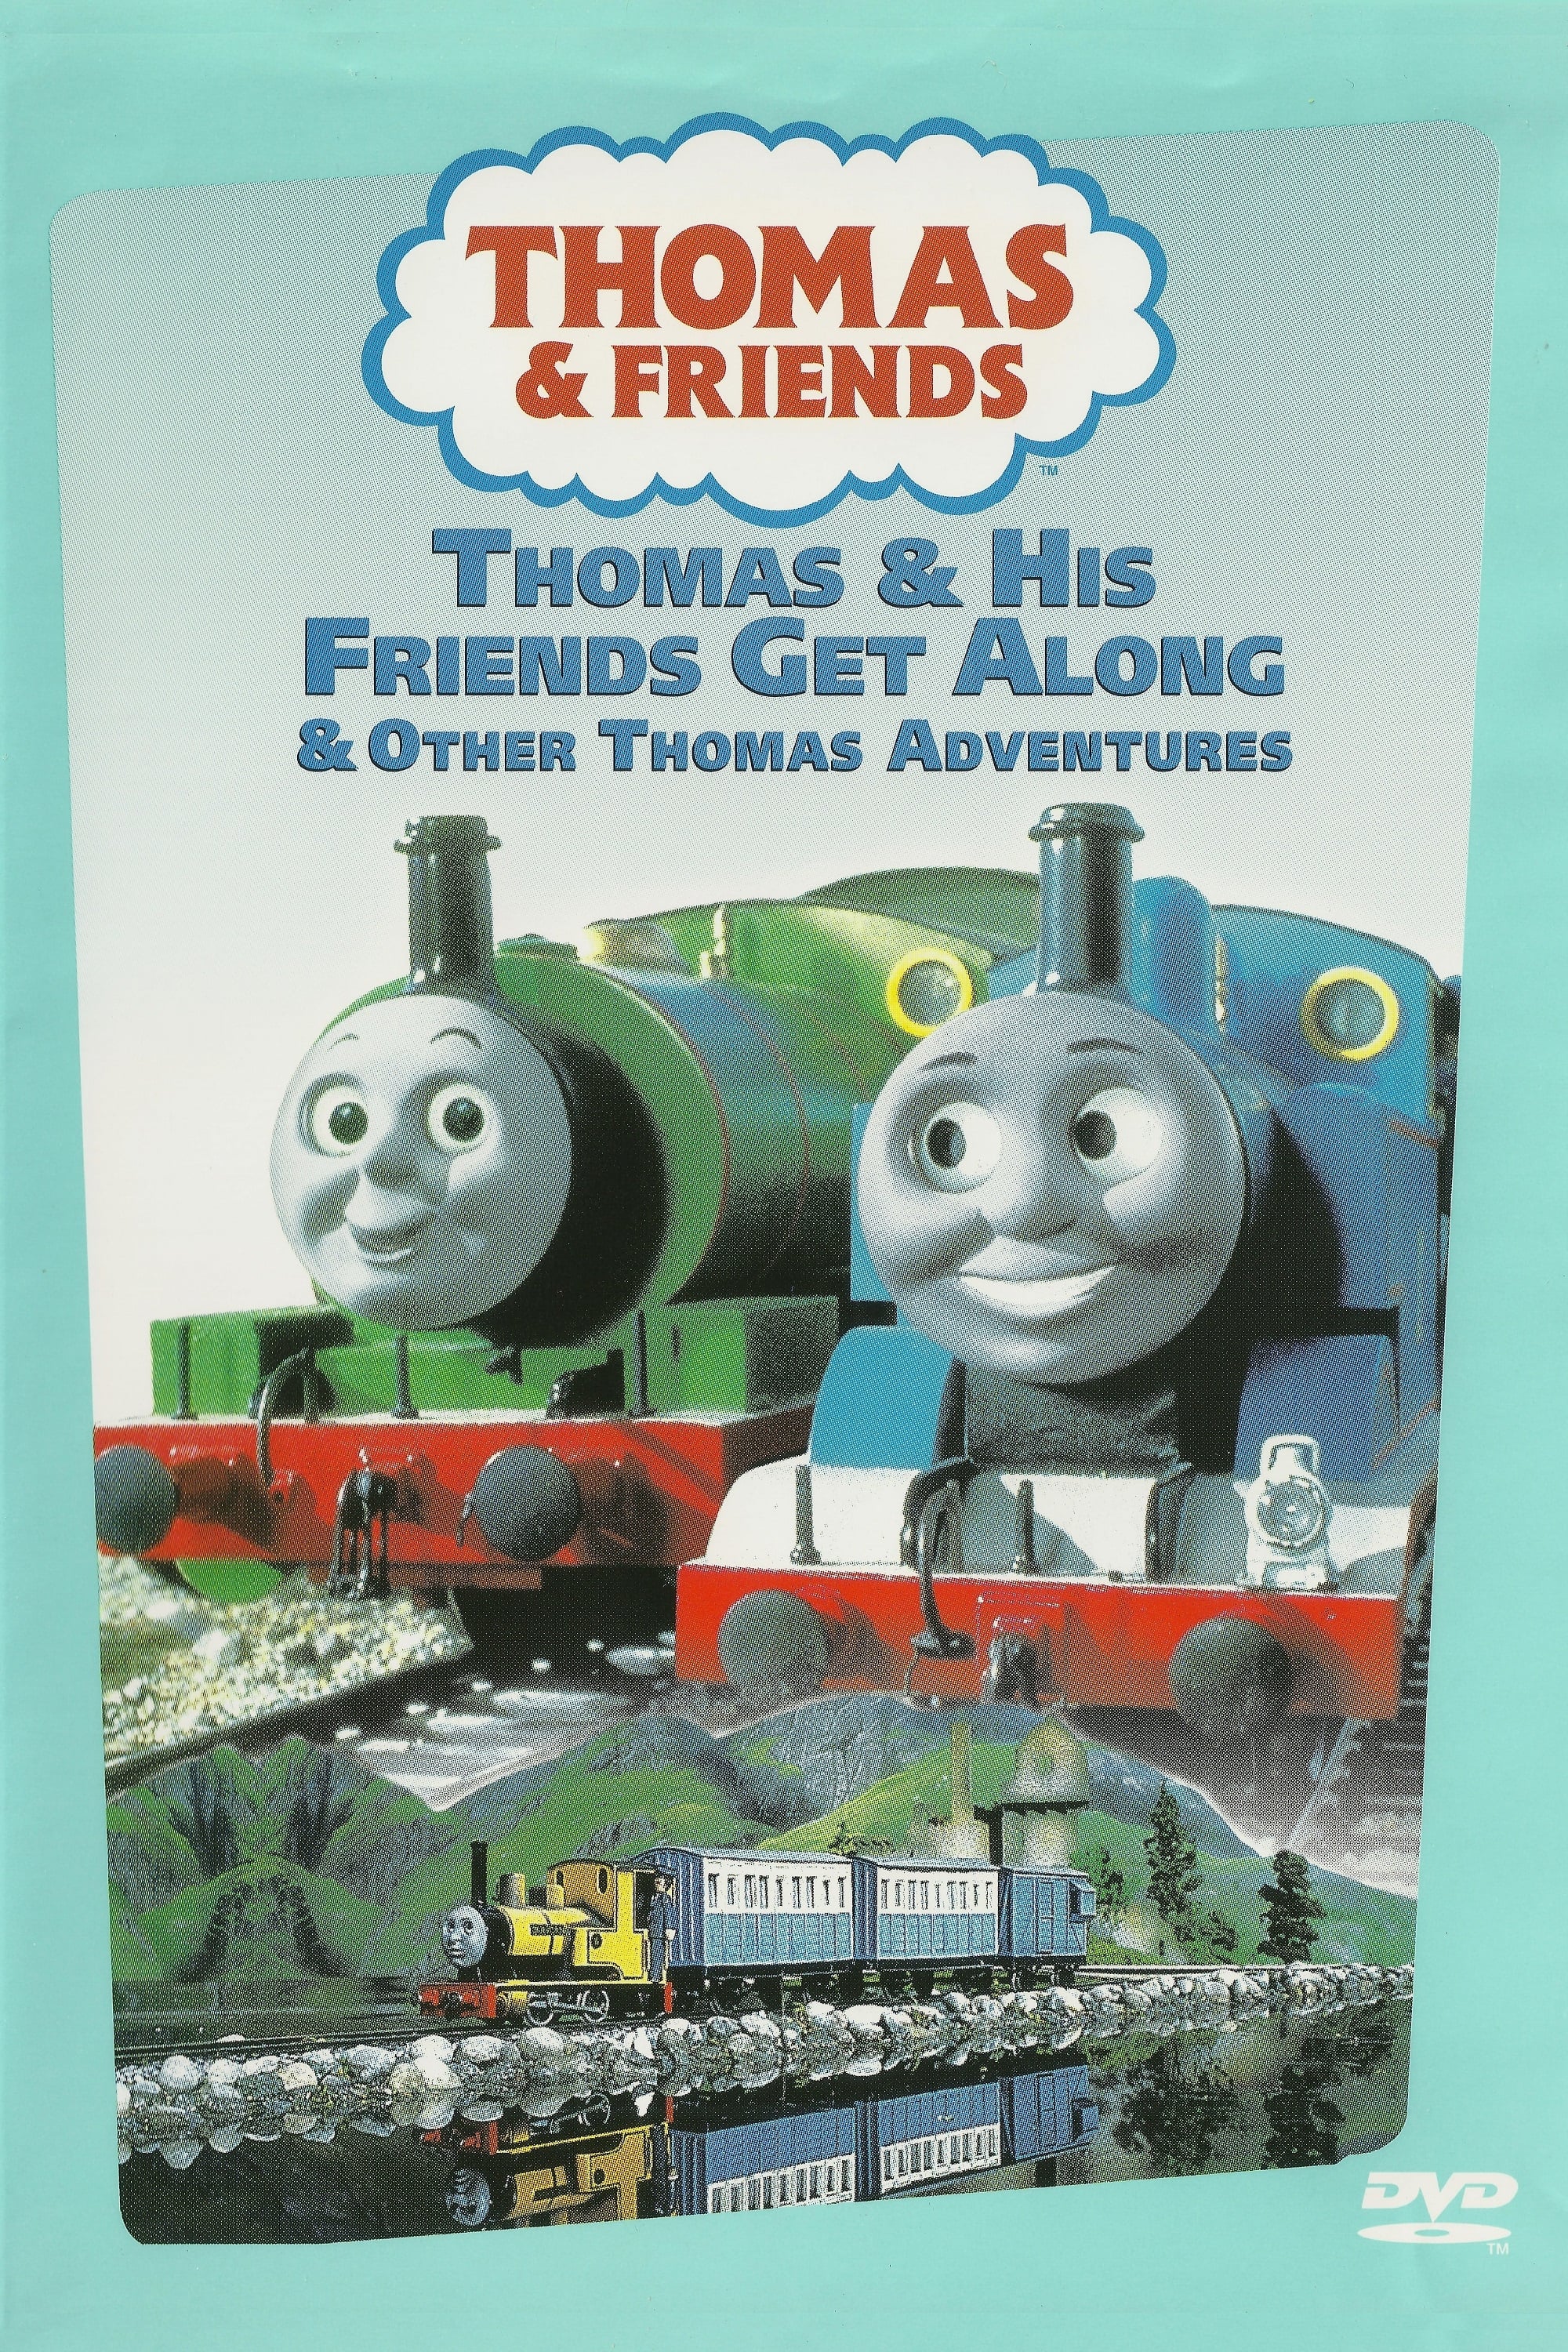 Thomas & Friends: Thomas & His Friends Get Along & Other Thomas Adventures (2000)